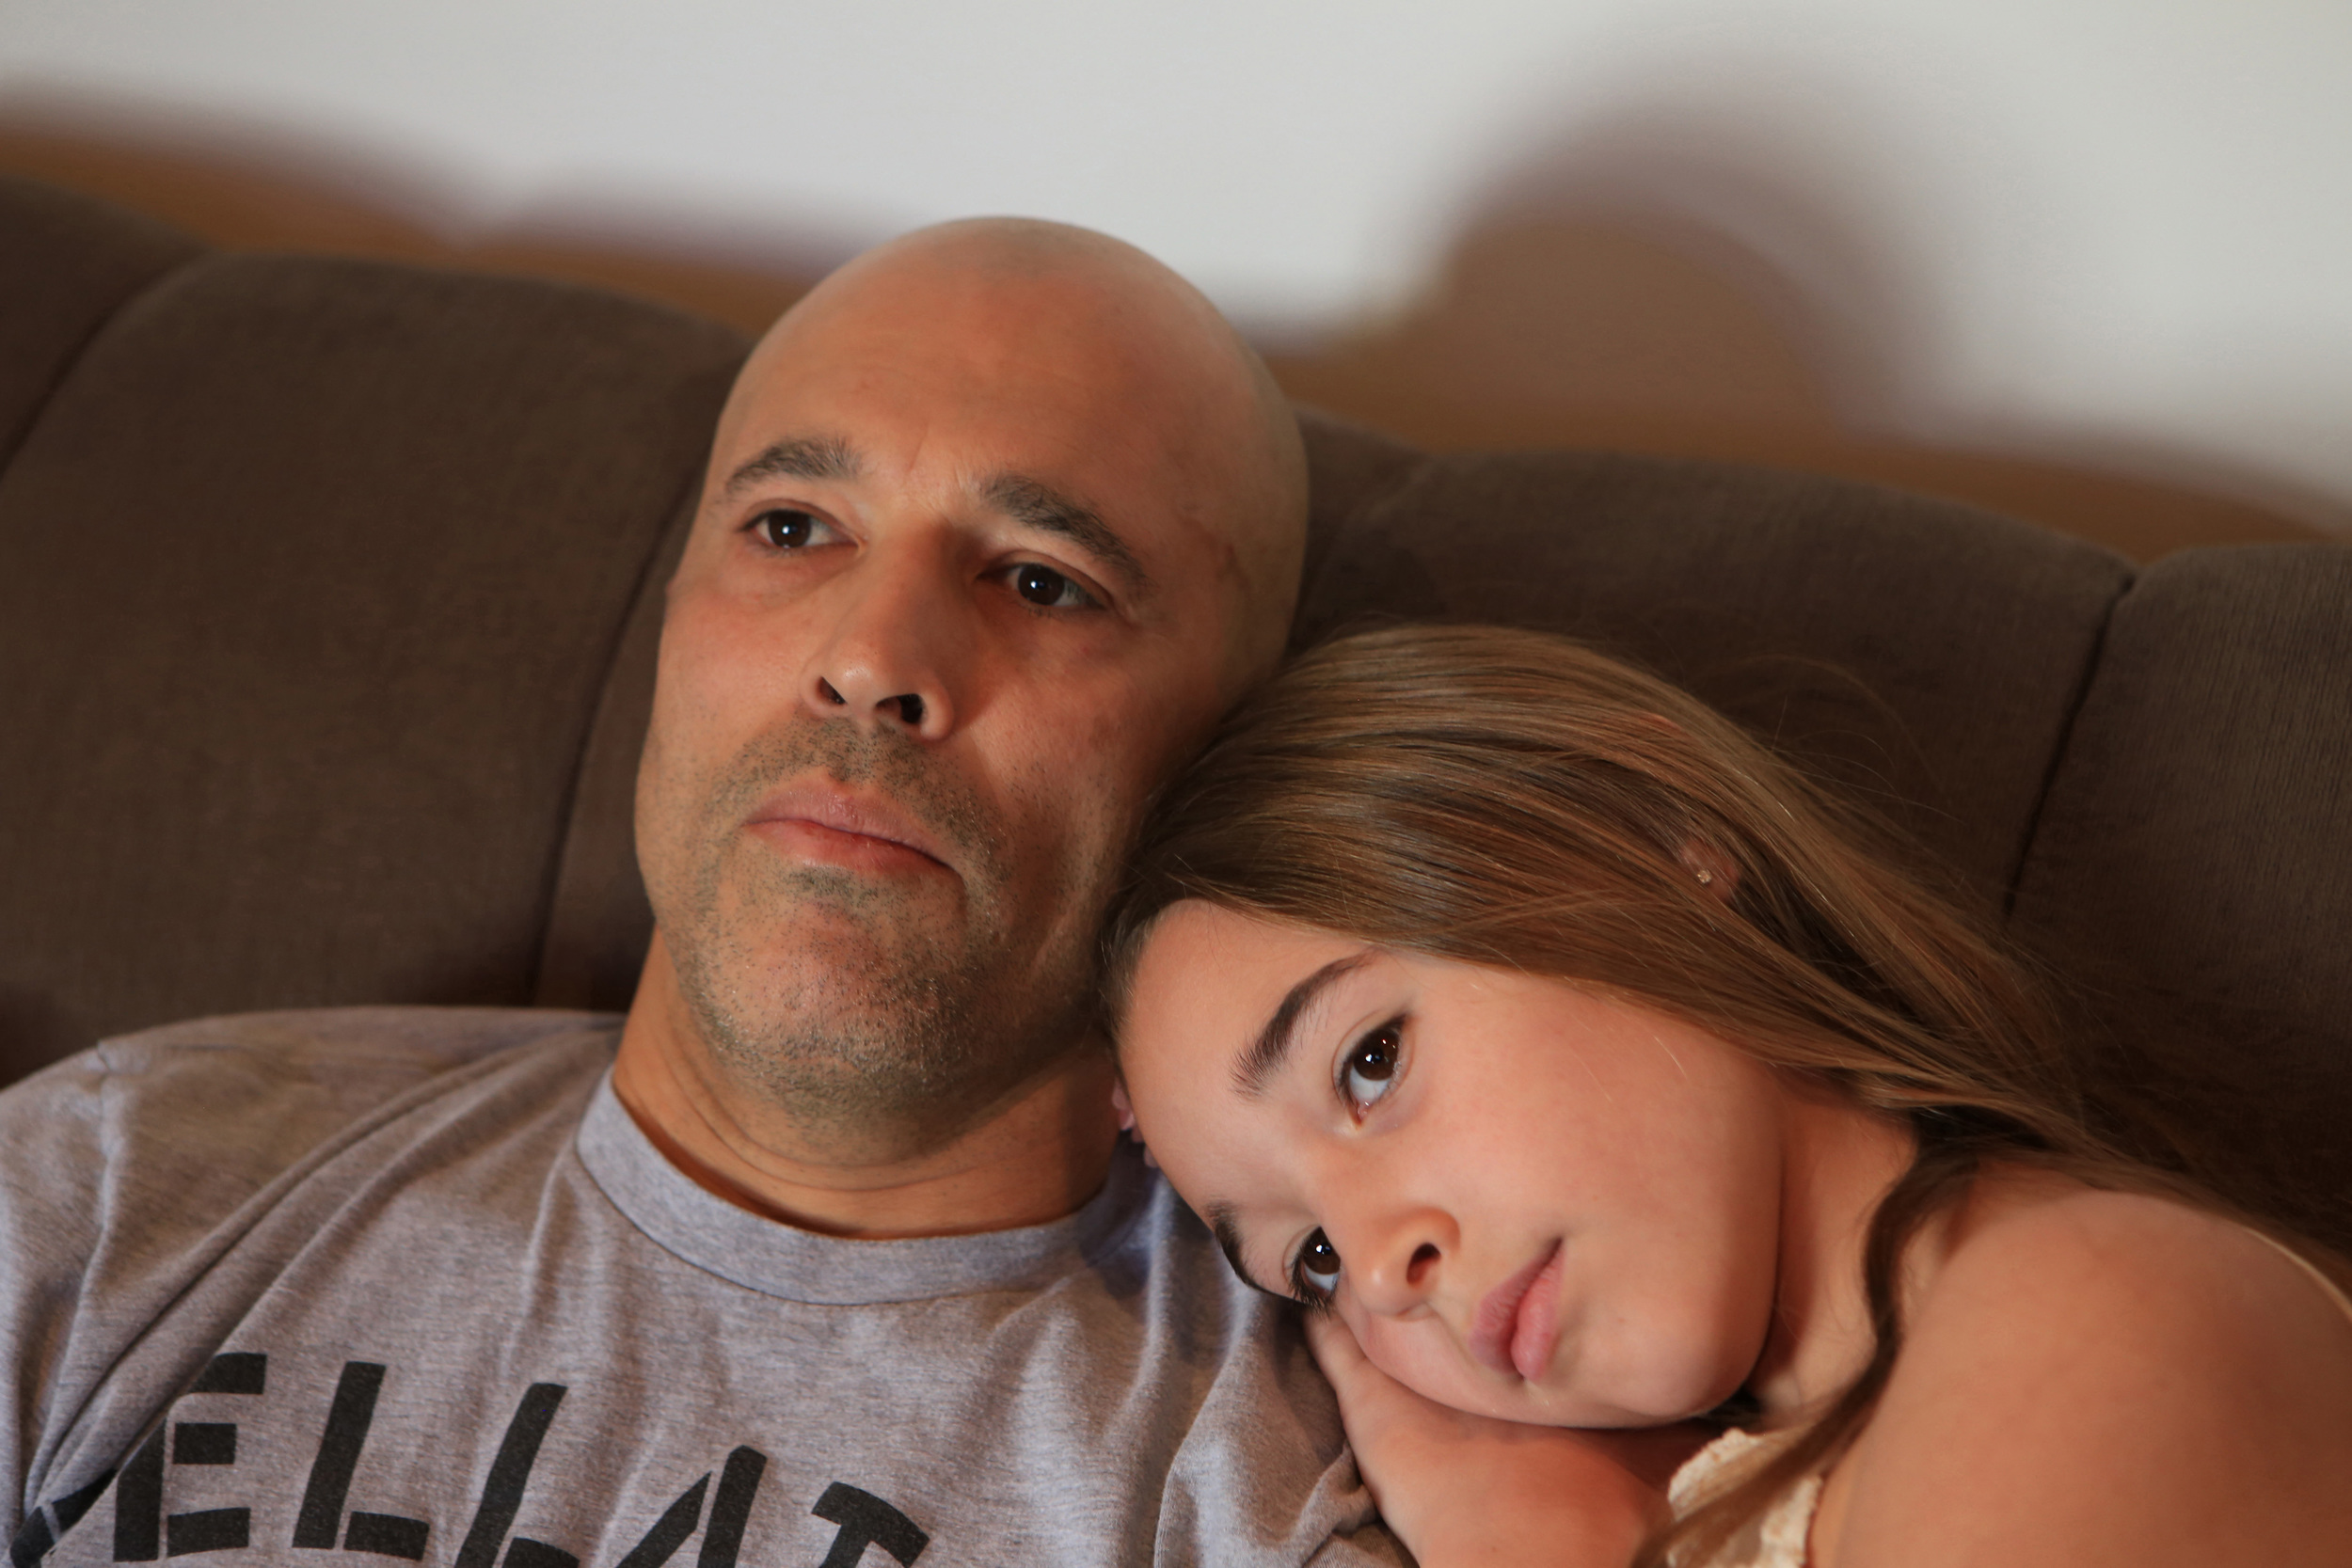  Royce Gracie, father and professional mixed martial artist for Bellator MMA, left, watches early morning television with his 10-year-old daughter, Kharianna, right, after packing her lunch, fixing her breakfast and before taking her to school at the